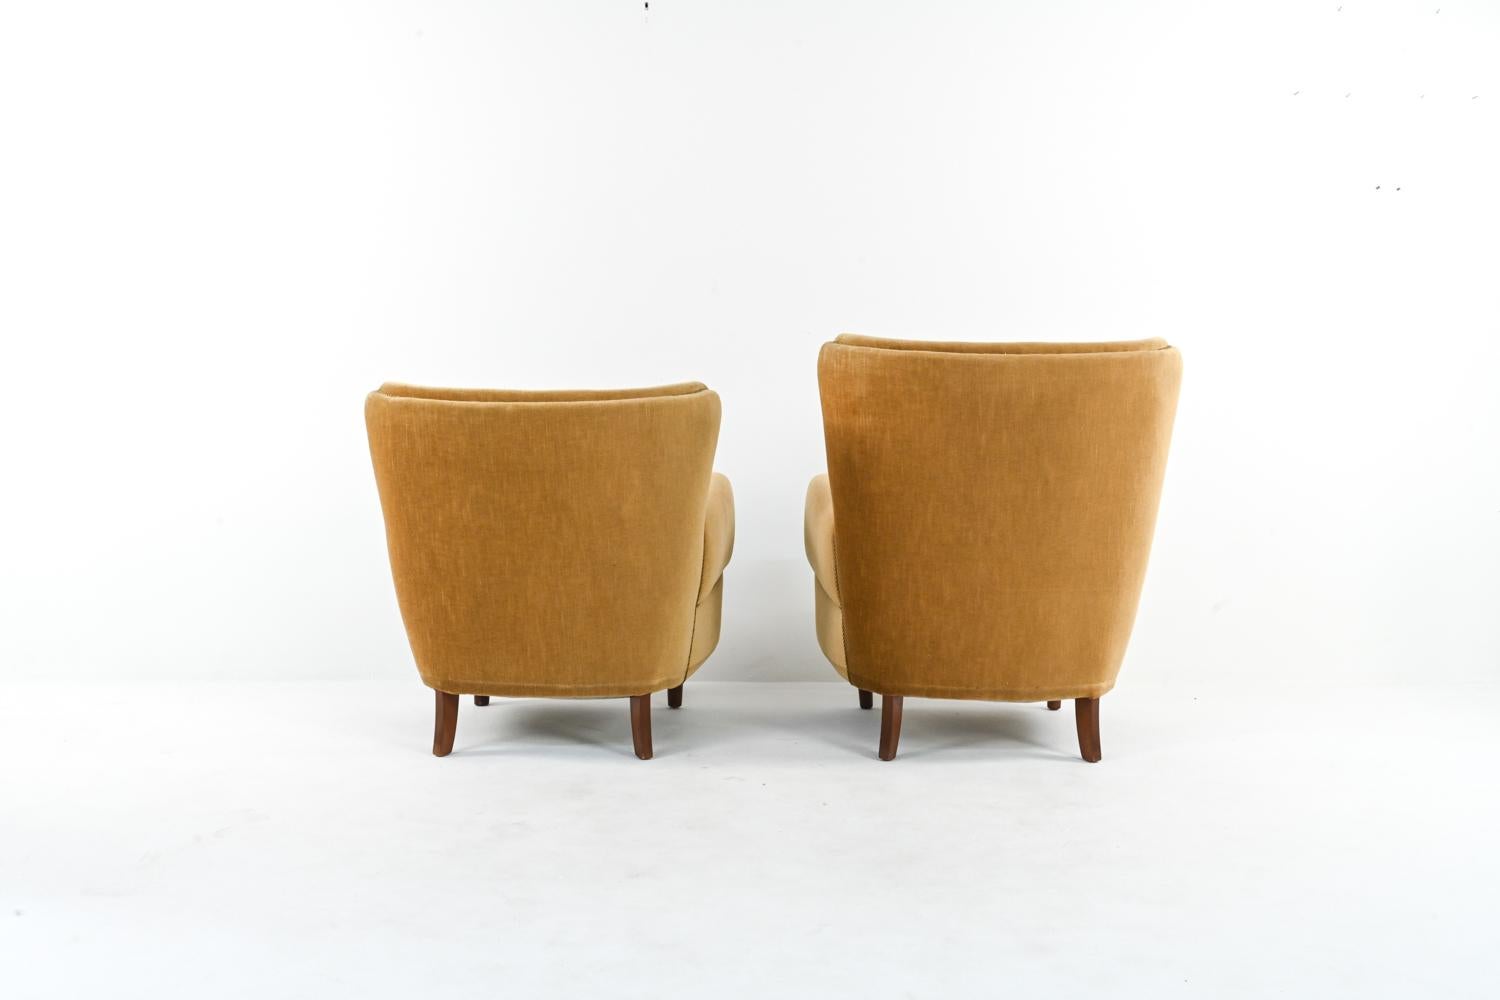 20th Century Danish Mohair His & Hers Easy Chairs Attributed to Fritz Hansen, c. 1950's